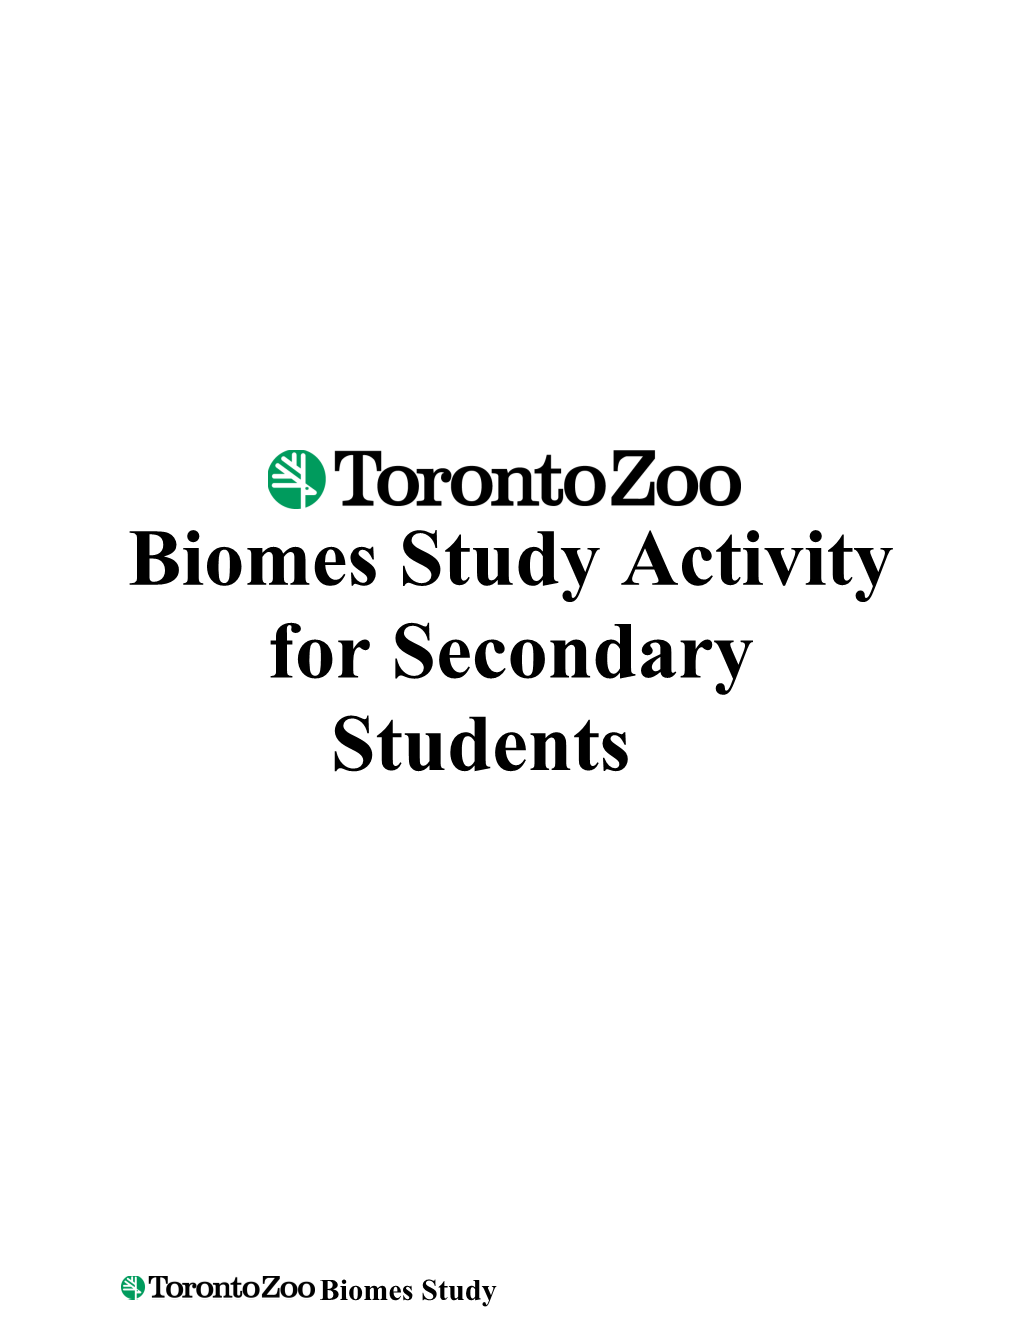 Biomes Study Activity for Secondary Students